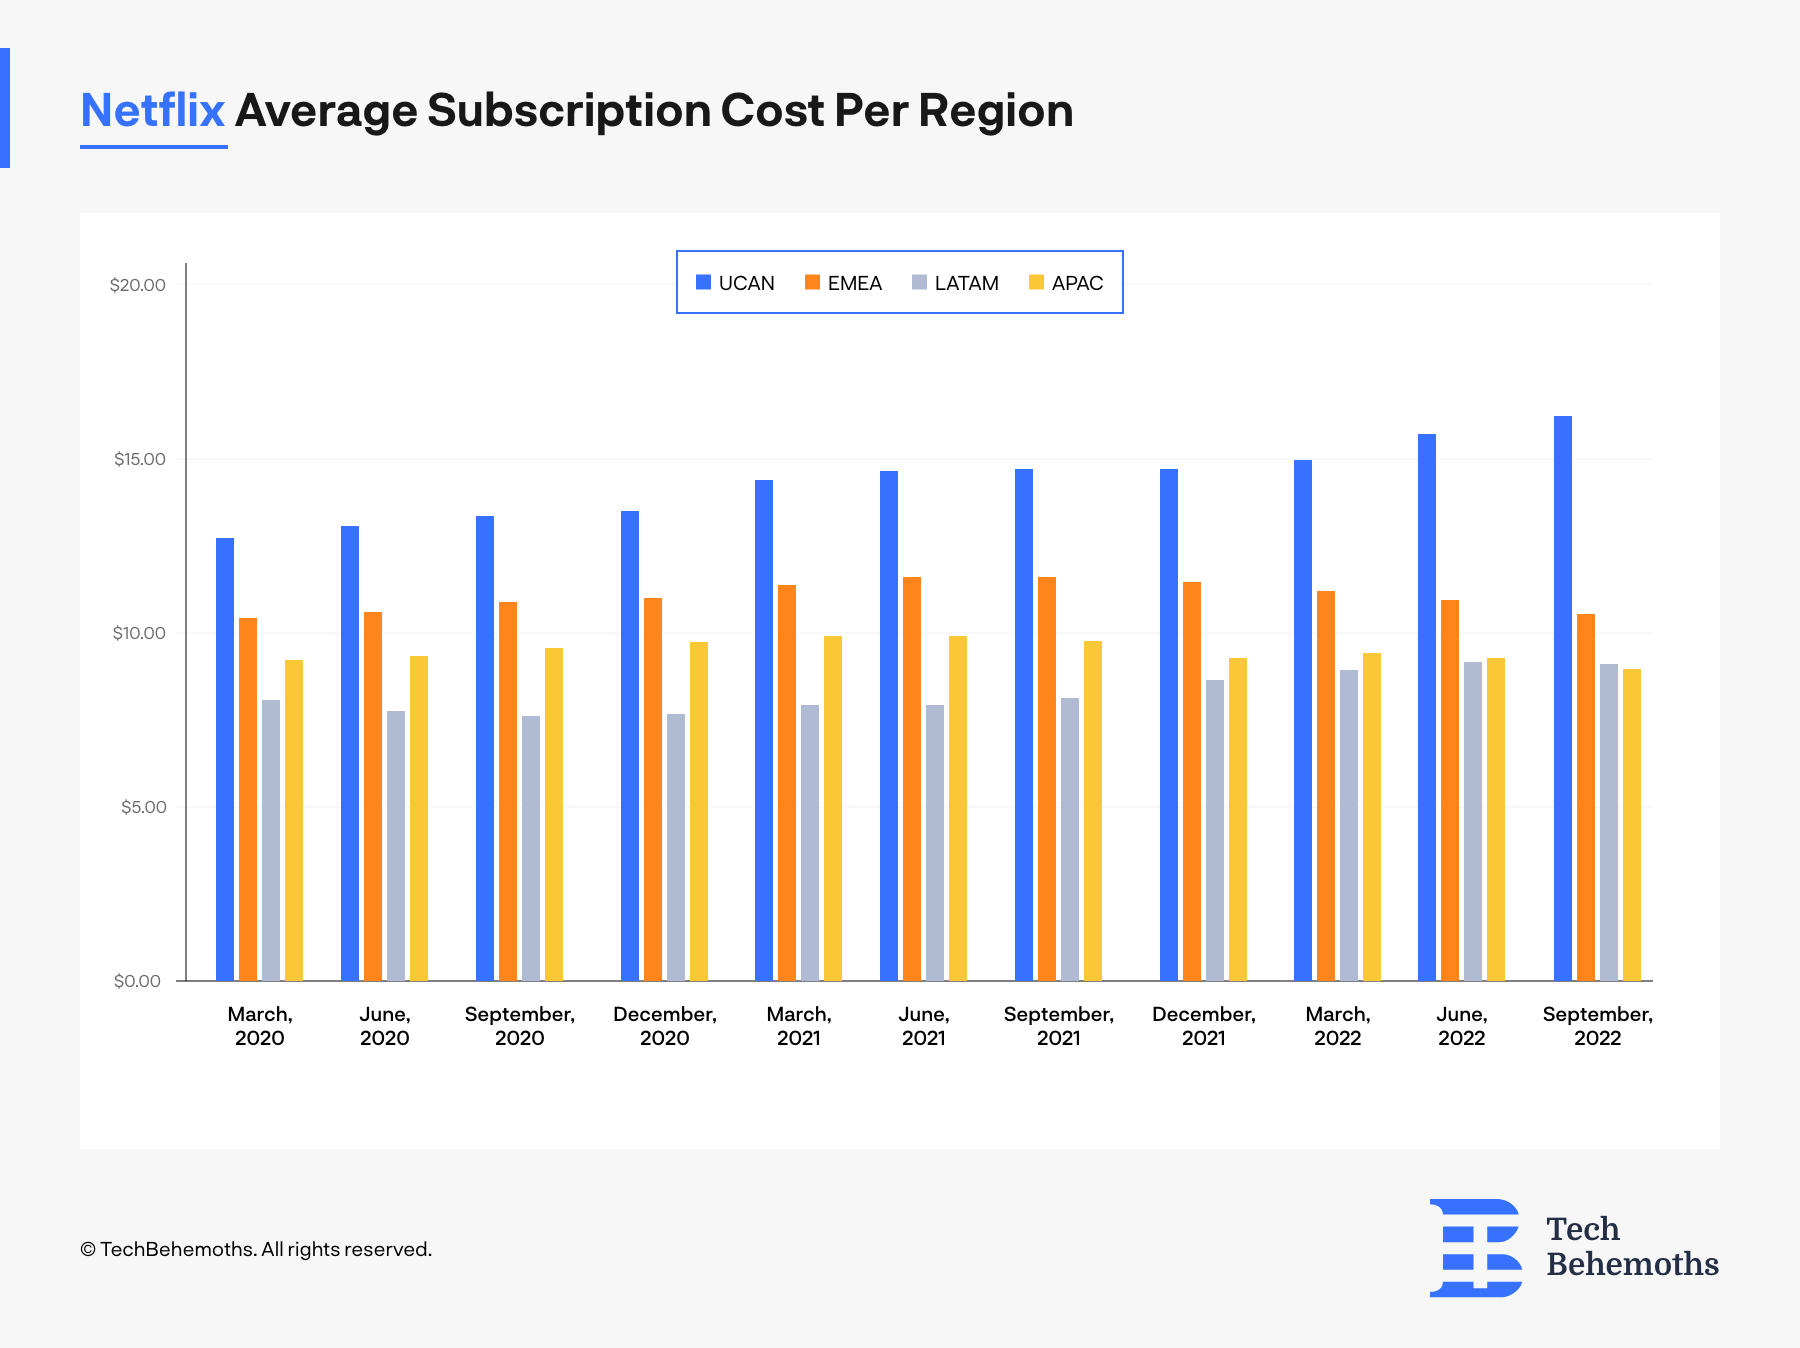 Average subscription costs on Netflix by region between January 2020 - September 2022